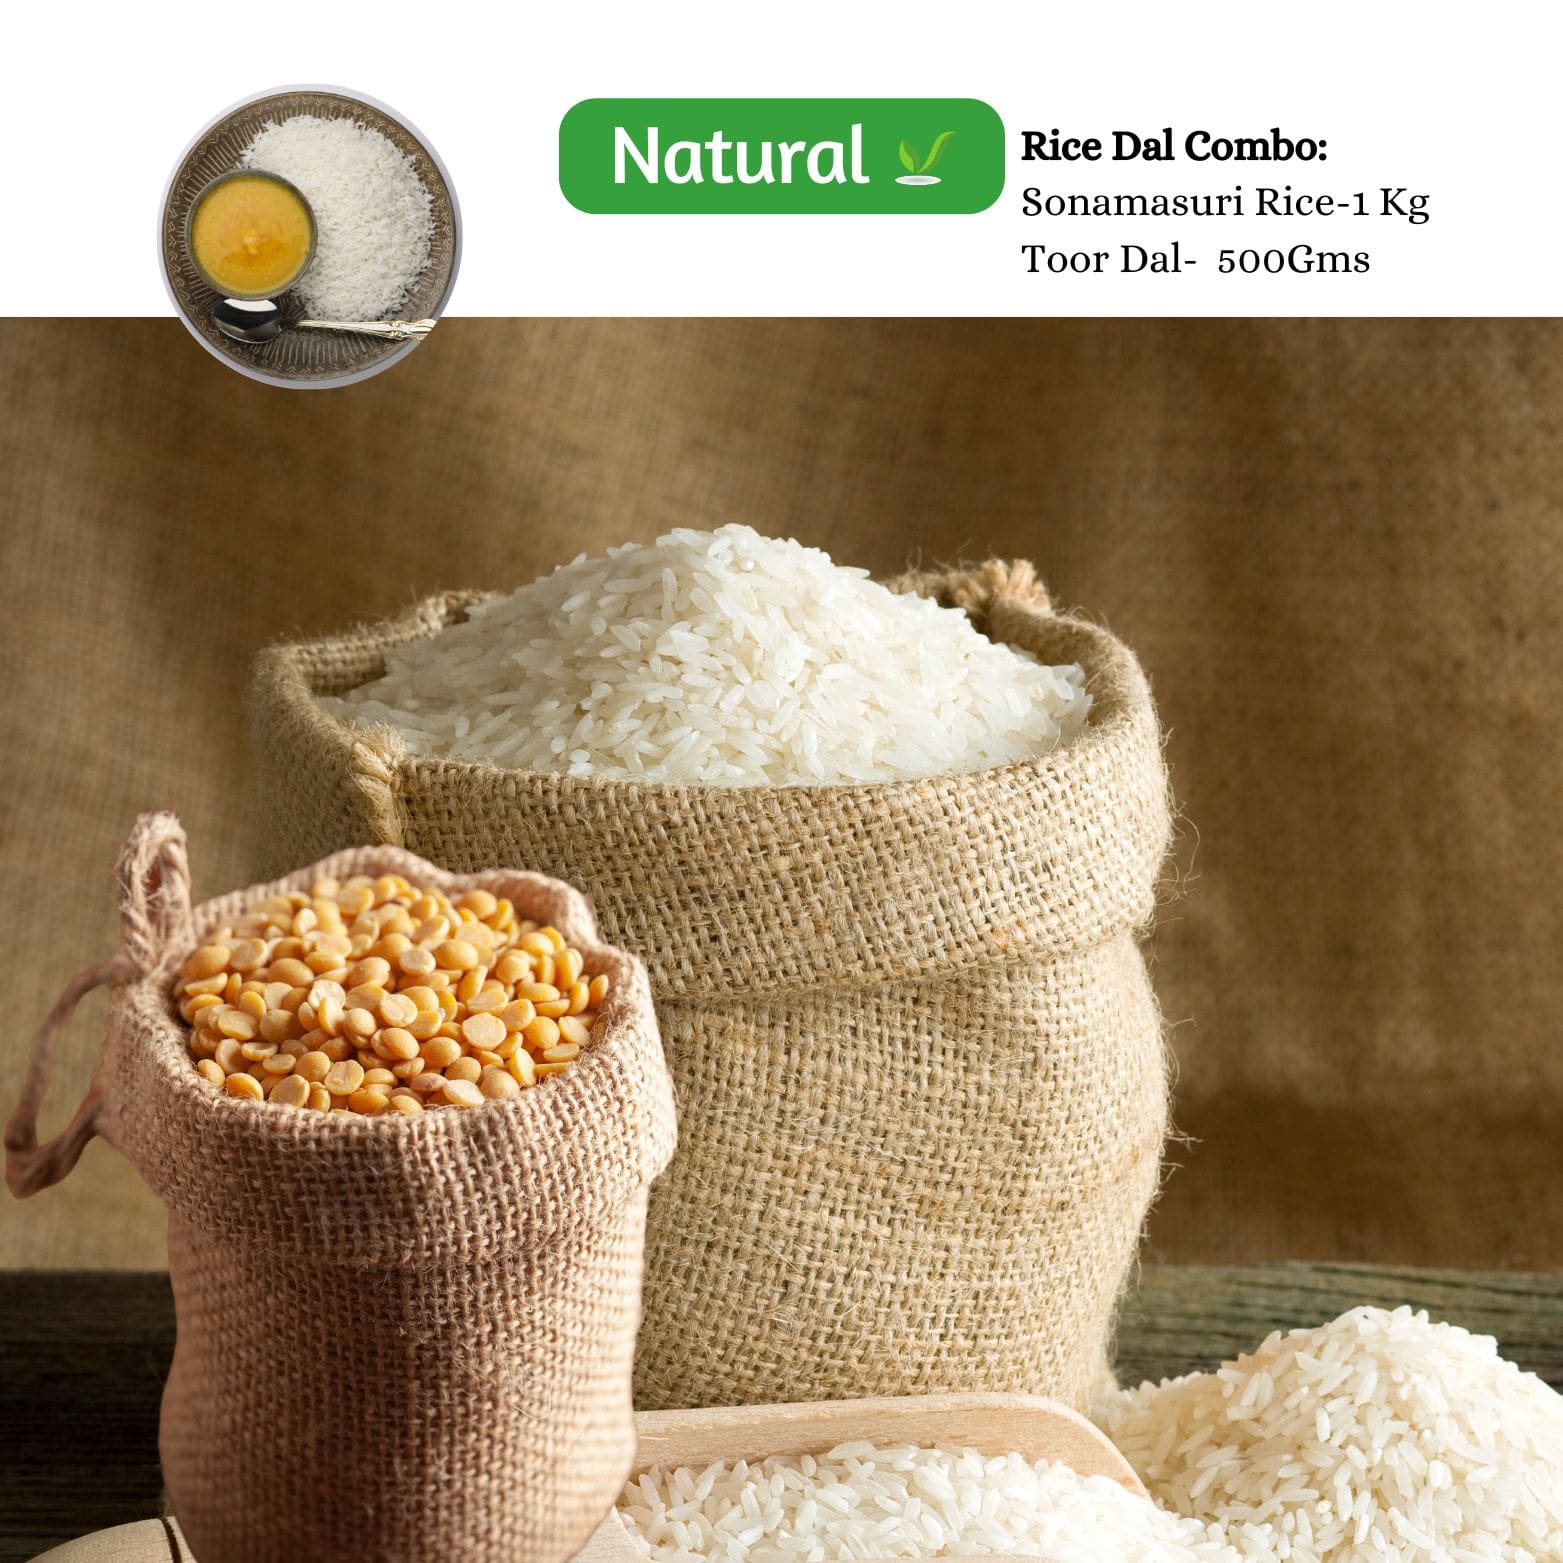 organic Rice Dal Combo - Online store for organic products in Bangalore - COMBOS |